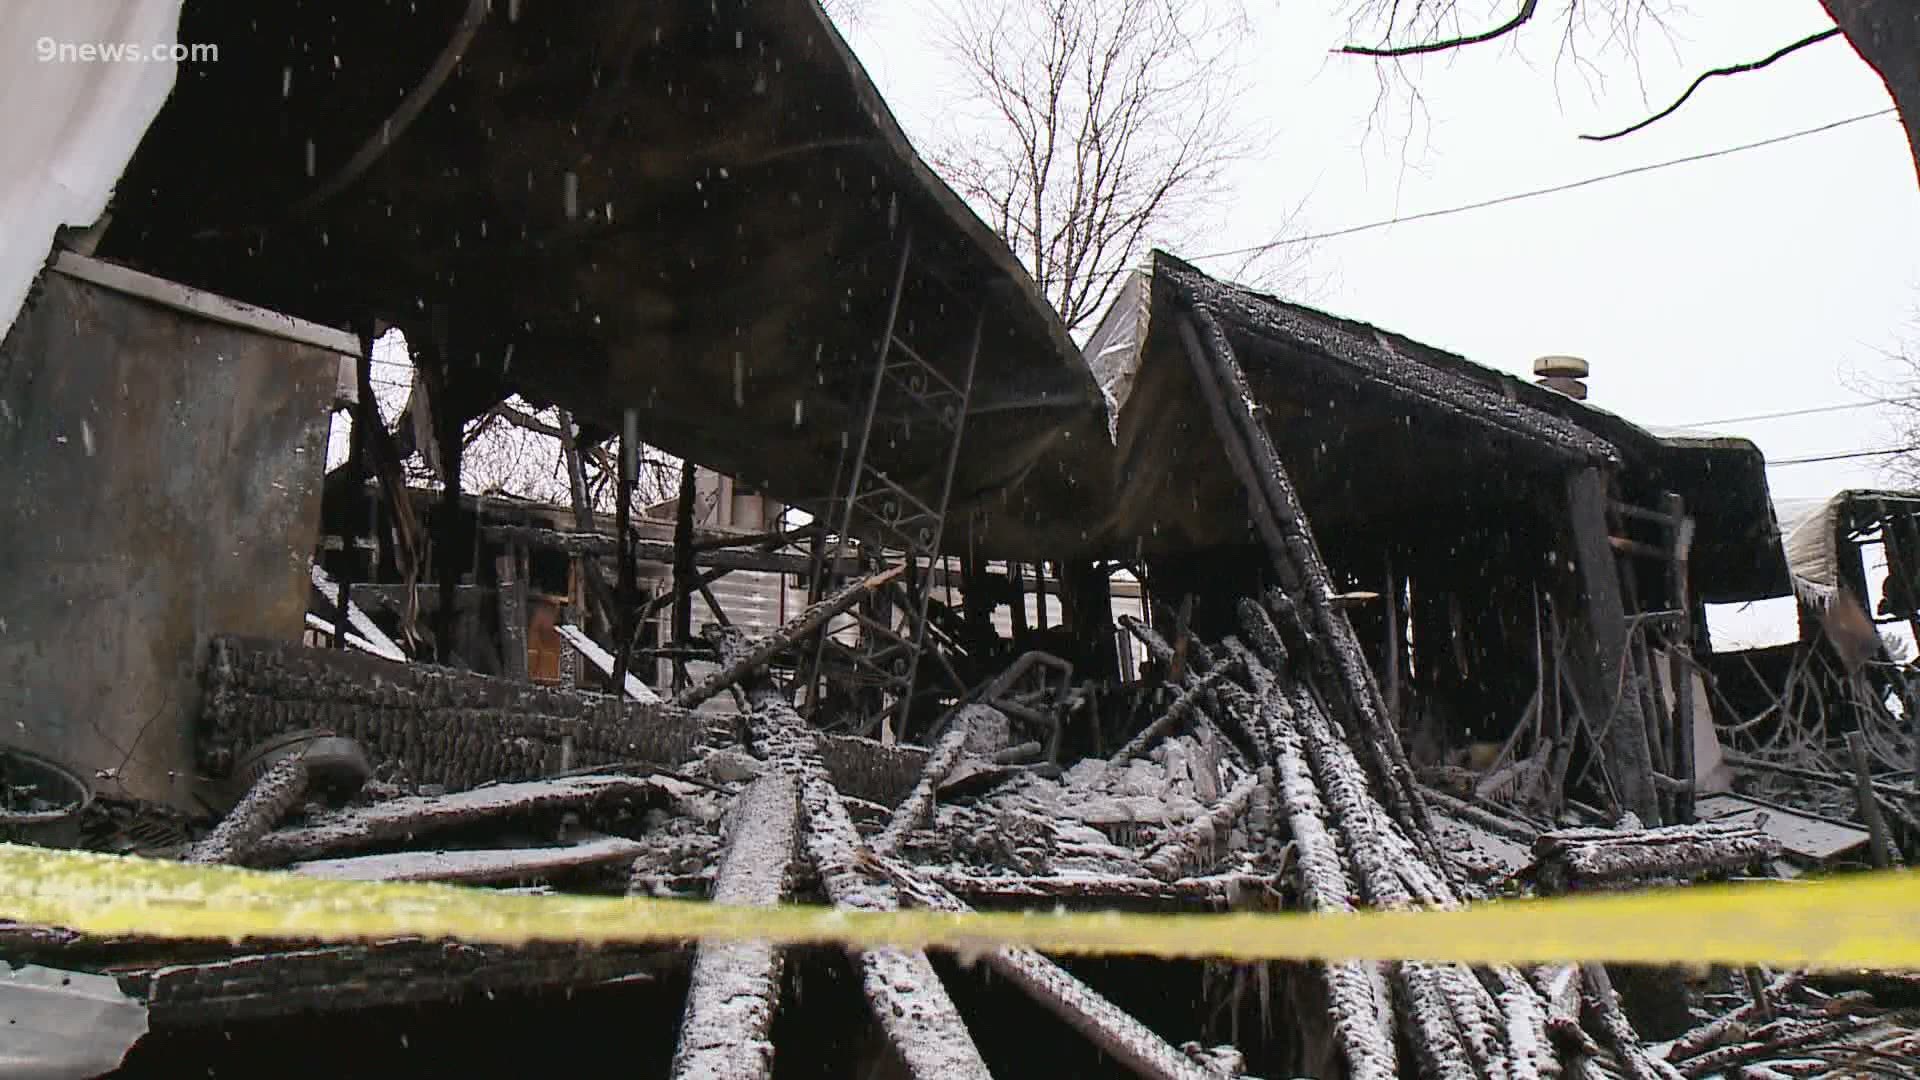 When mobile homes went up in flames, firefighters and deputies worked to save lives.